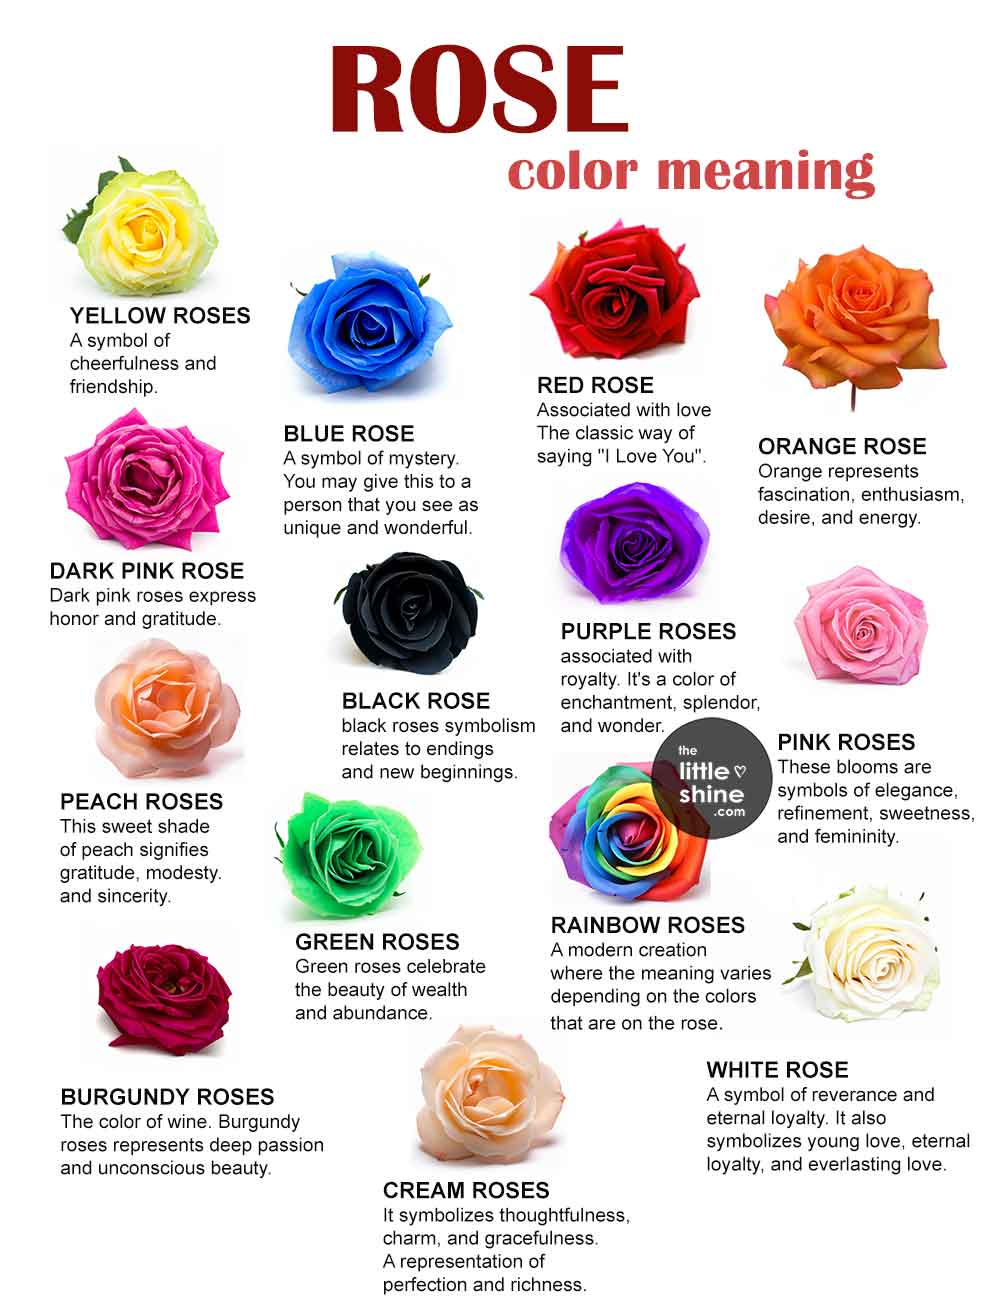 12 Rose Color Meanings You Should Know Before You Buy